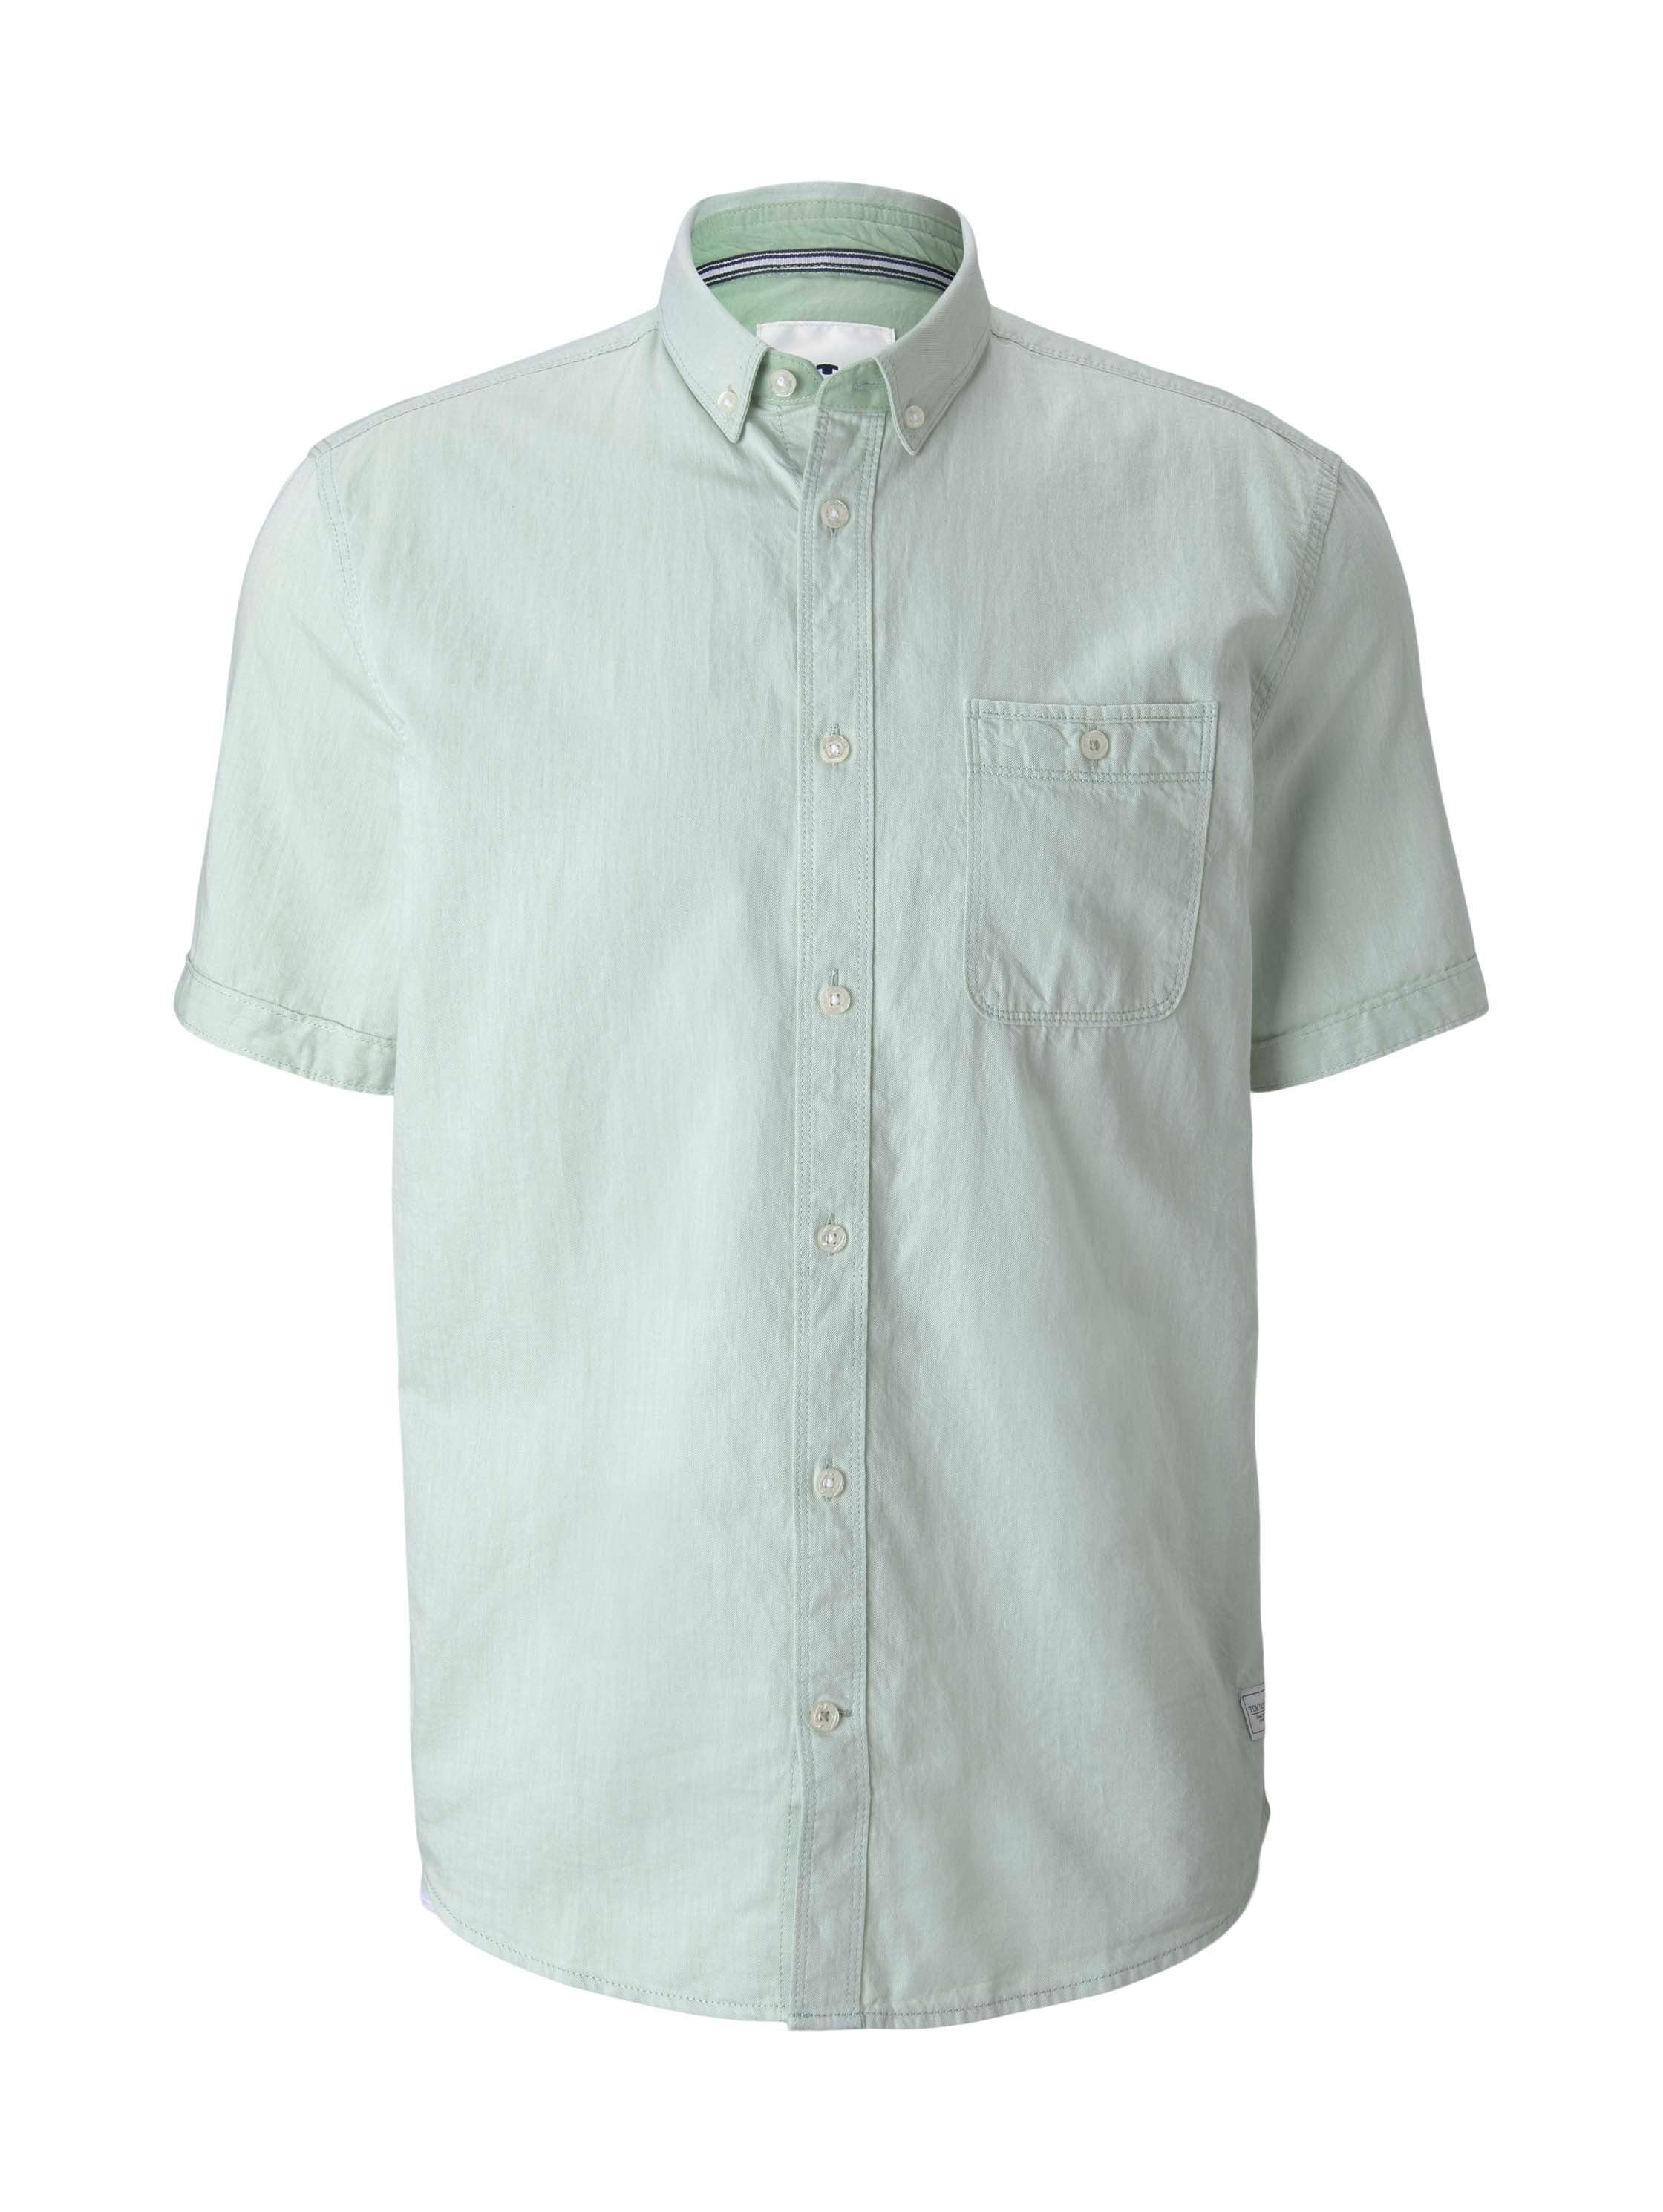 TOM TAILOR Kurzarmshirt green white two face twill